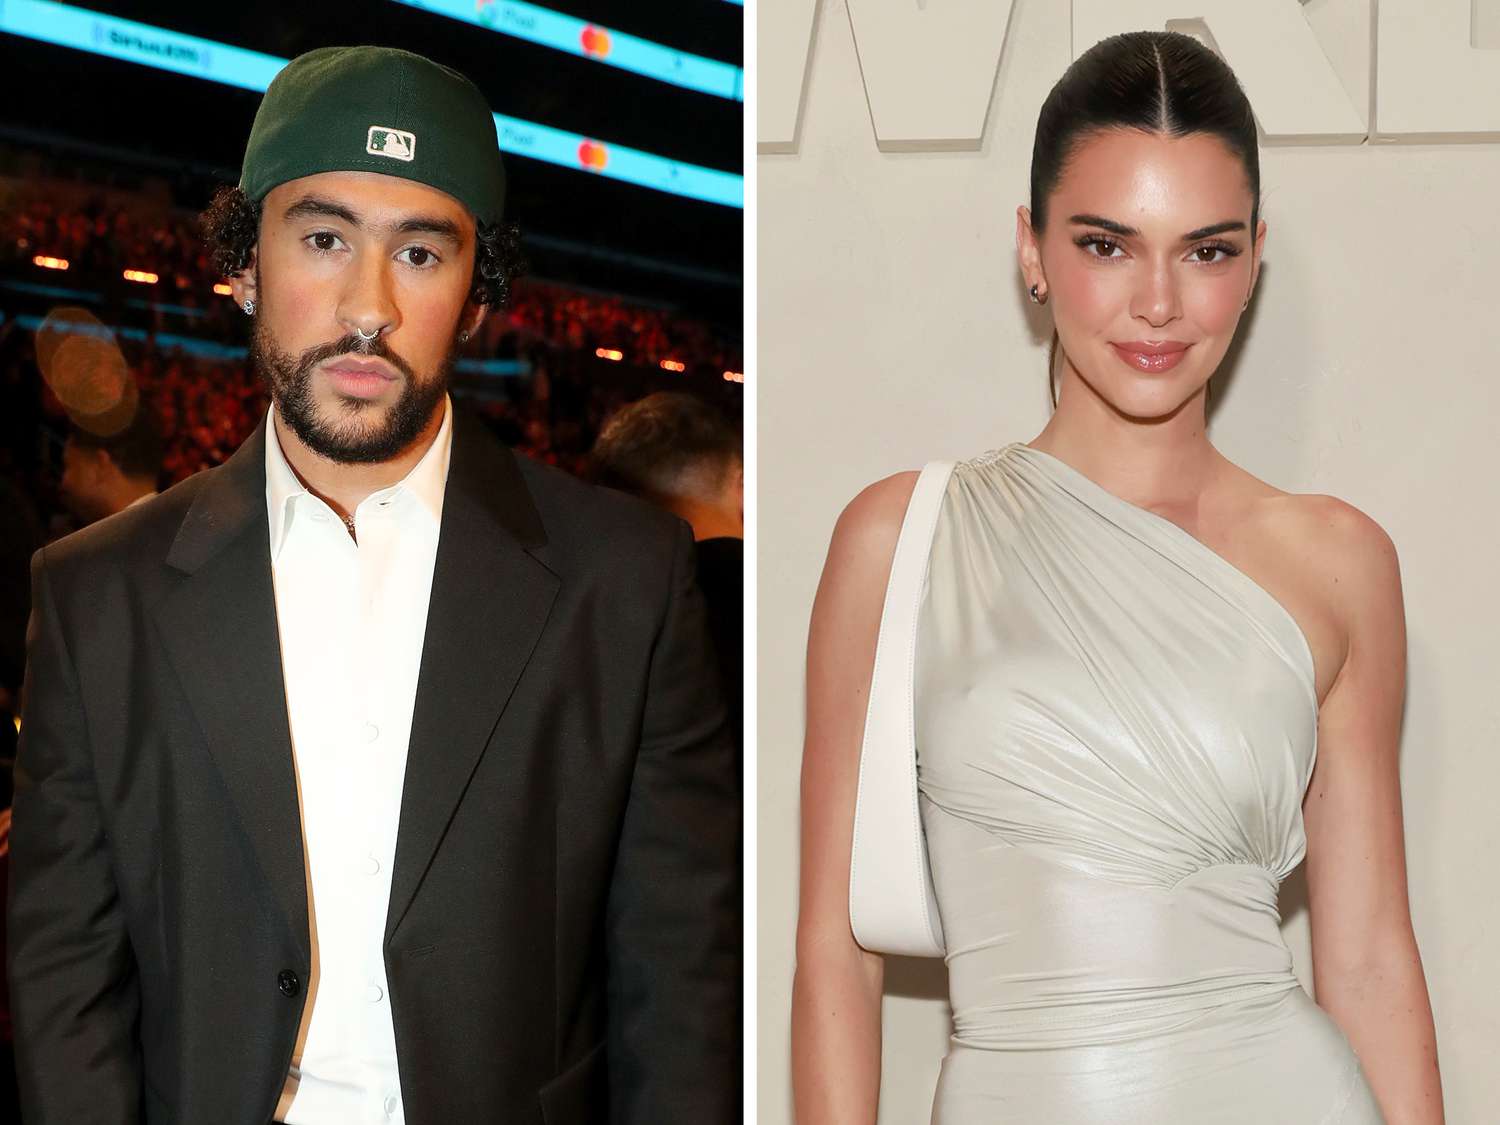 Kendall Jenner And Bad Bunny Reunite For New Year’s Eve Trip With Friends